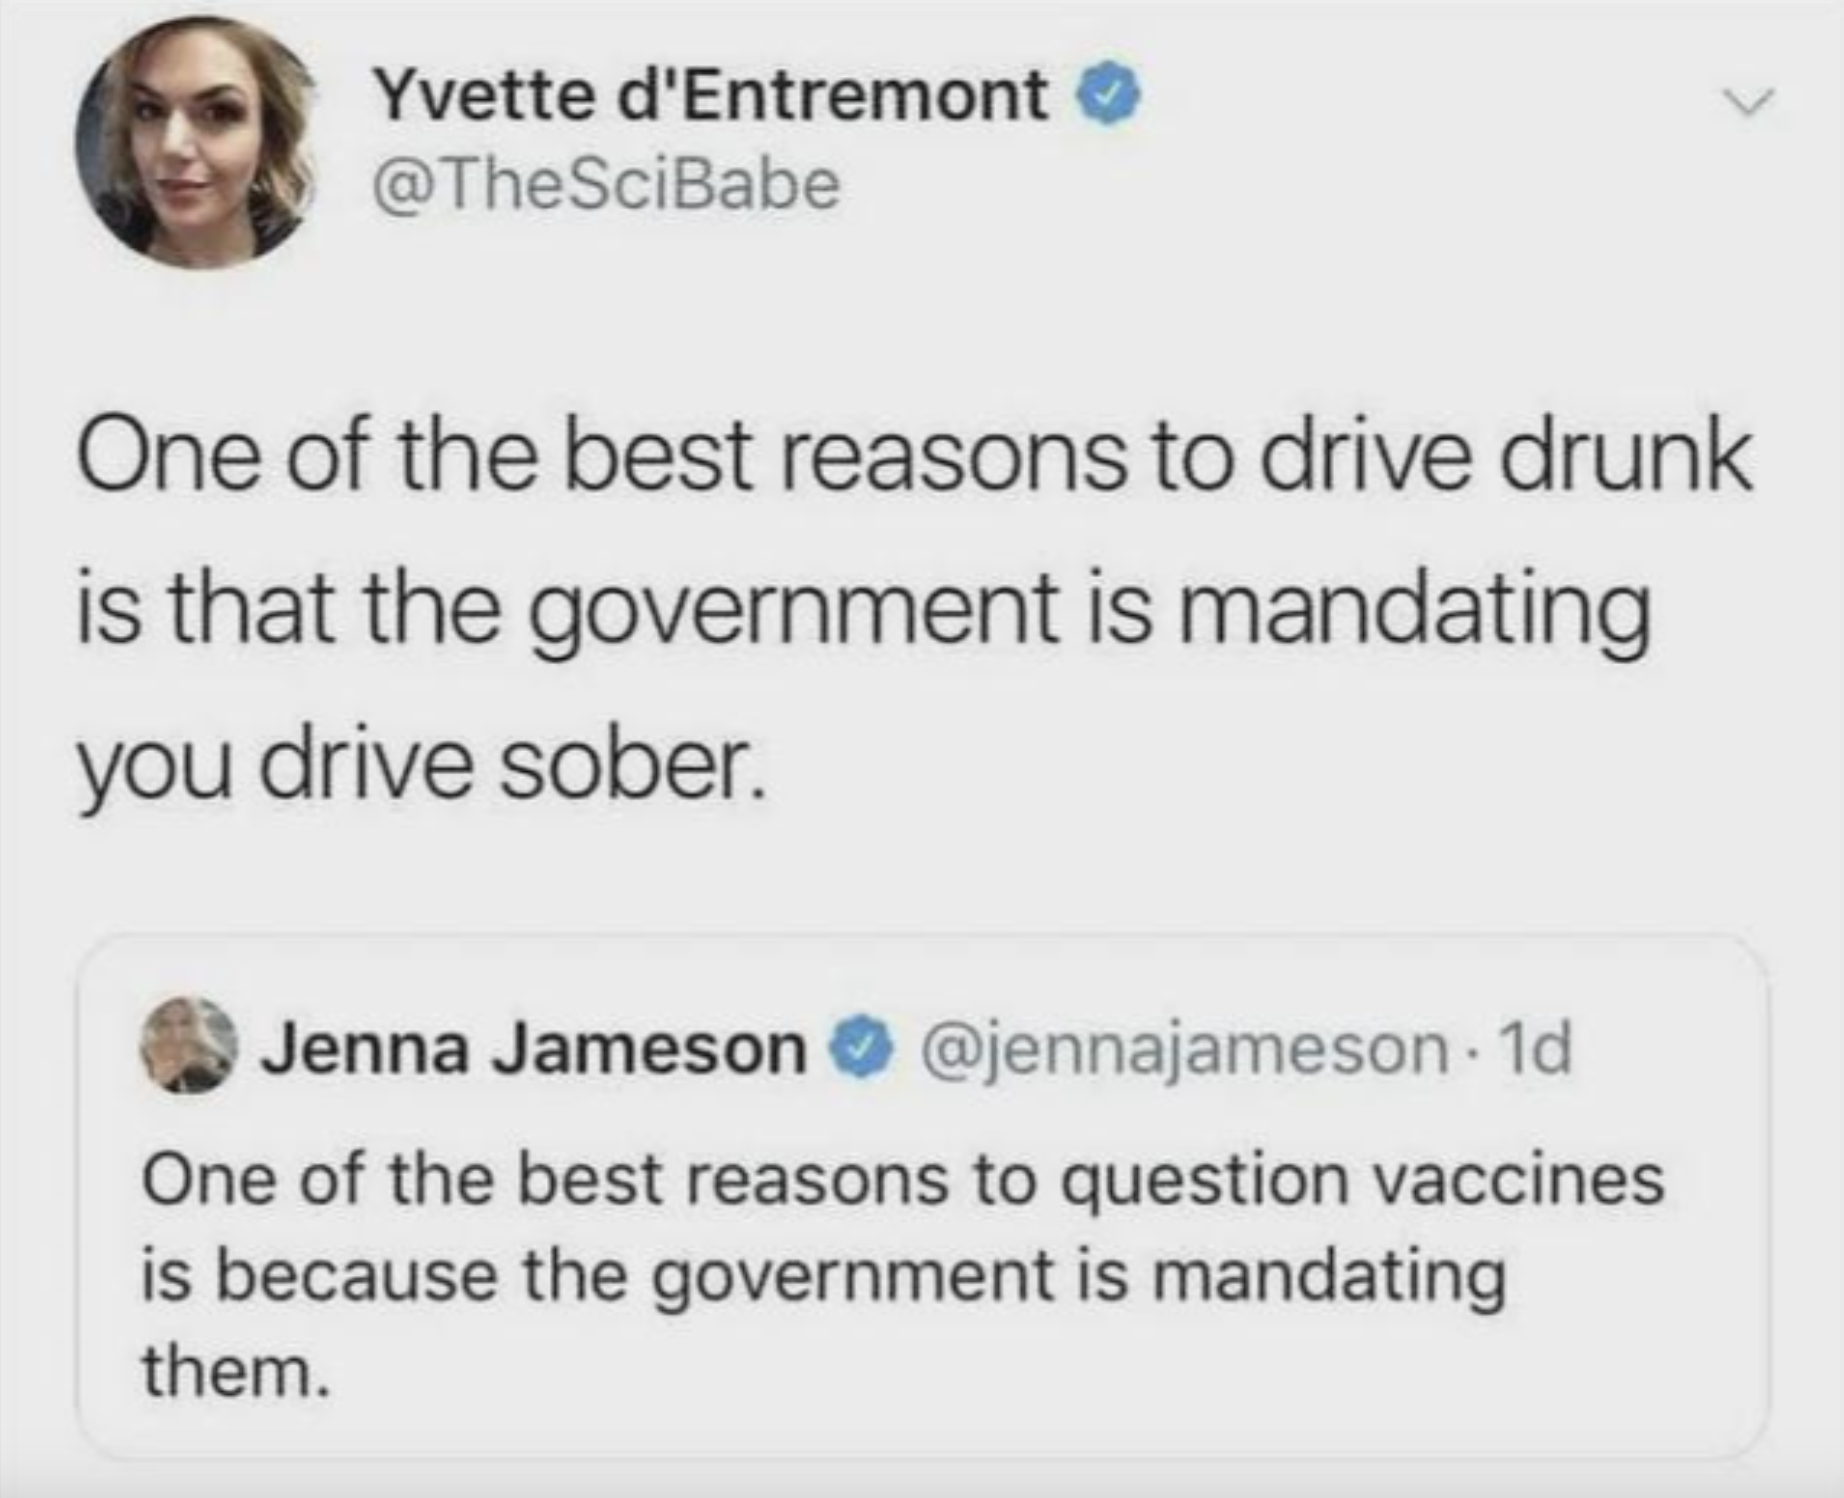 screenshot - Yvette d'Entremont One of the best reasons to drive drunk is that the government is mandating you drive sober. Jenna Jameson 1d One of the best reasons to question vaccines is because the government is mandating them.